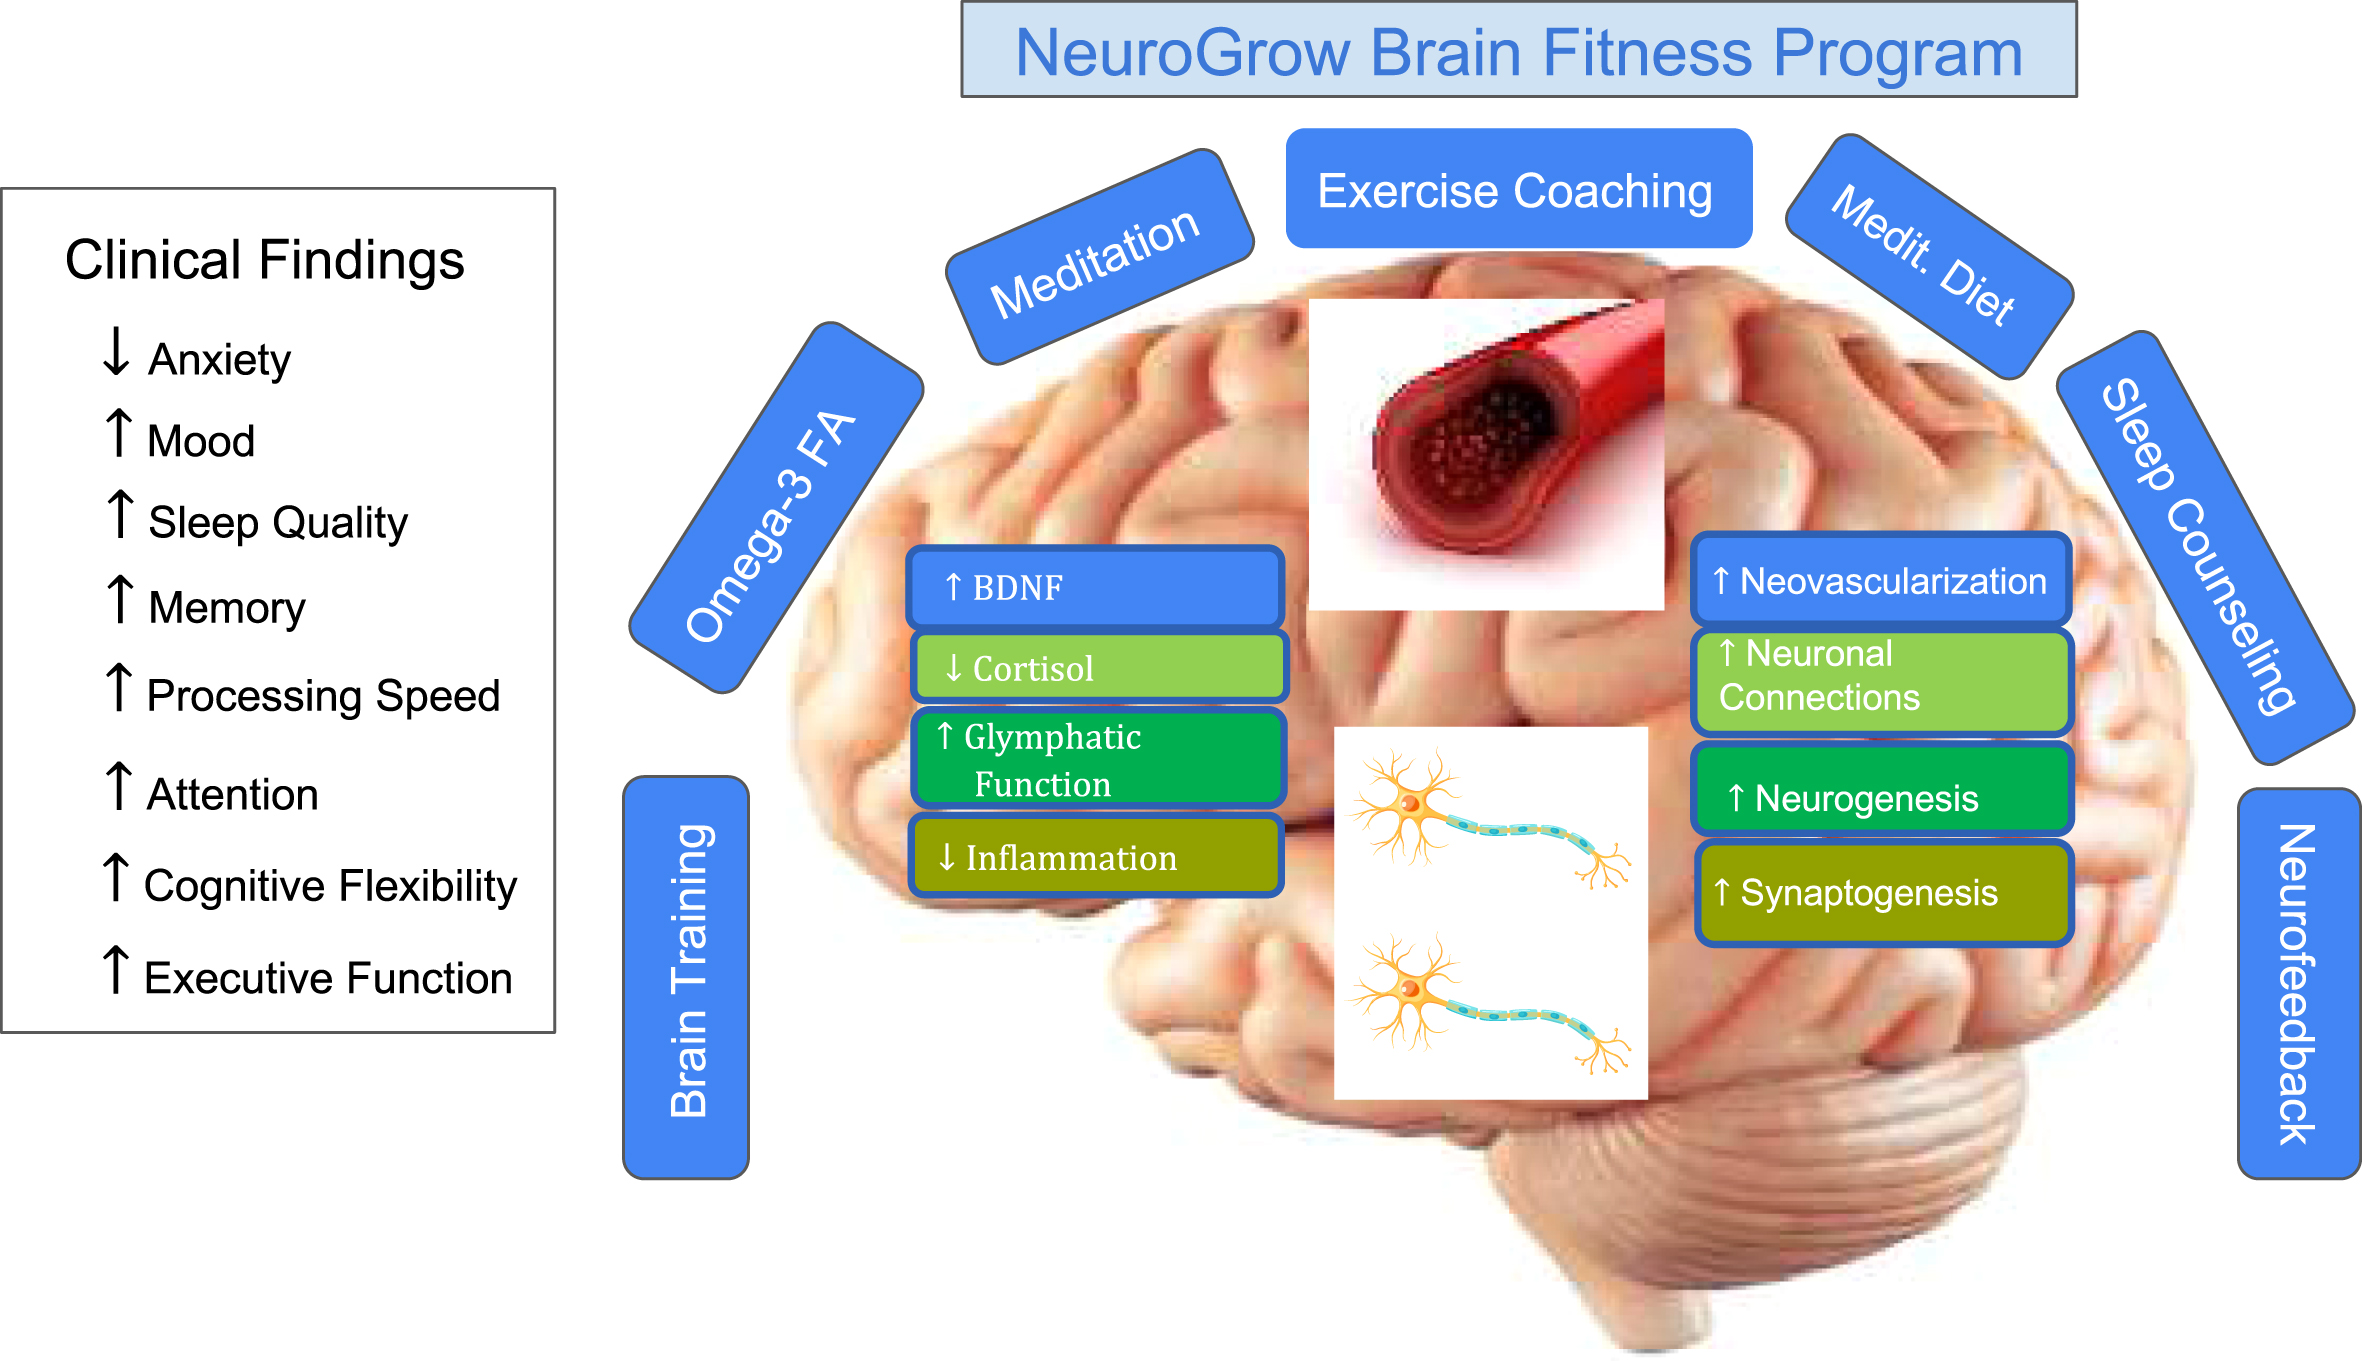 Summary of the NeuroGrow Brain Fitness Program interventions and the mechanisms by which this multi-disciplinary set of interventions may improve clinical symptoms. In NeuroGrow’s 12-week Brain Fitness Program, patients receive EEG-based neurofeedback, which is a form of biofeedback to help normalize brain oscillations. They also receive life coaching (to improve their sleep, meditate, exercise more, eat a Mediterranean diet, and take omega-3 fatty acid supplements) as well as targeted brain training (to improve their memory, attention, executive function, processing speed, and other cognitive domains). The combination of these interventions can potentially increase levels of brain-derived neurotrophic factor (BDNF), reduce levels of cortisol, enhance glymphatic function, and reduce inflammation in the brain. They may also increase the number of blood vessels in the brain (neo-vascularization), promote neurogenesis, ameliorate connectivity in the brain, and result in a higher number of synapses. However, it is also possible that these interventions improve cognitive capacity and symptoms of patients with memory loss, ADHD, and PCS through other mechanisms such as better physical health and enhanced psychological factors. More studies with data from brain MRIs and blood biomarkers are needed to establish the exact mechanisms for improvements noted in these patient populations.